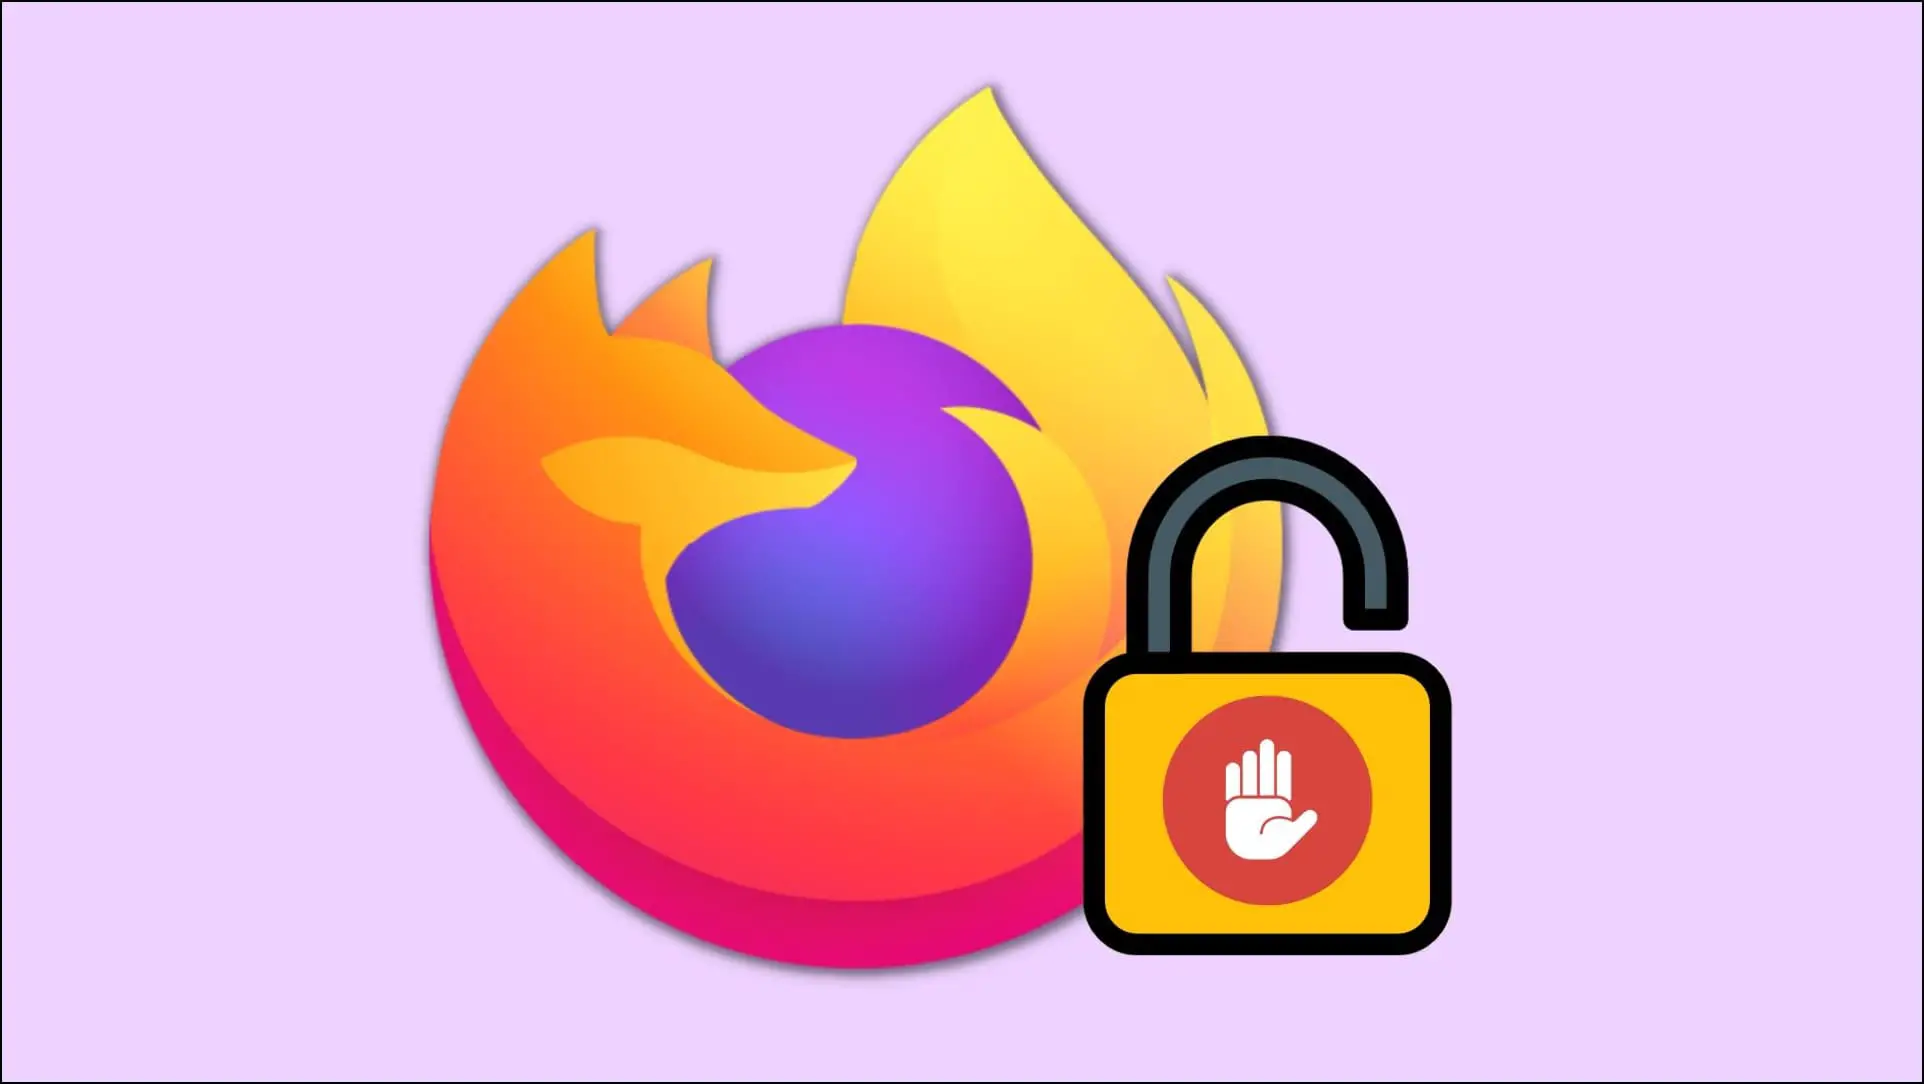 3 Ways to Block and Unblock Internet Sites with Firefox - wikiHow